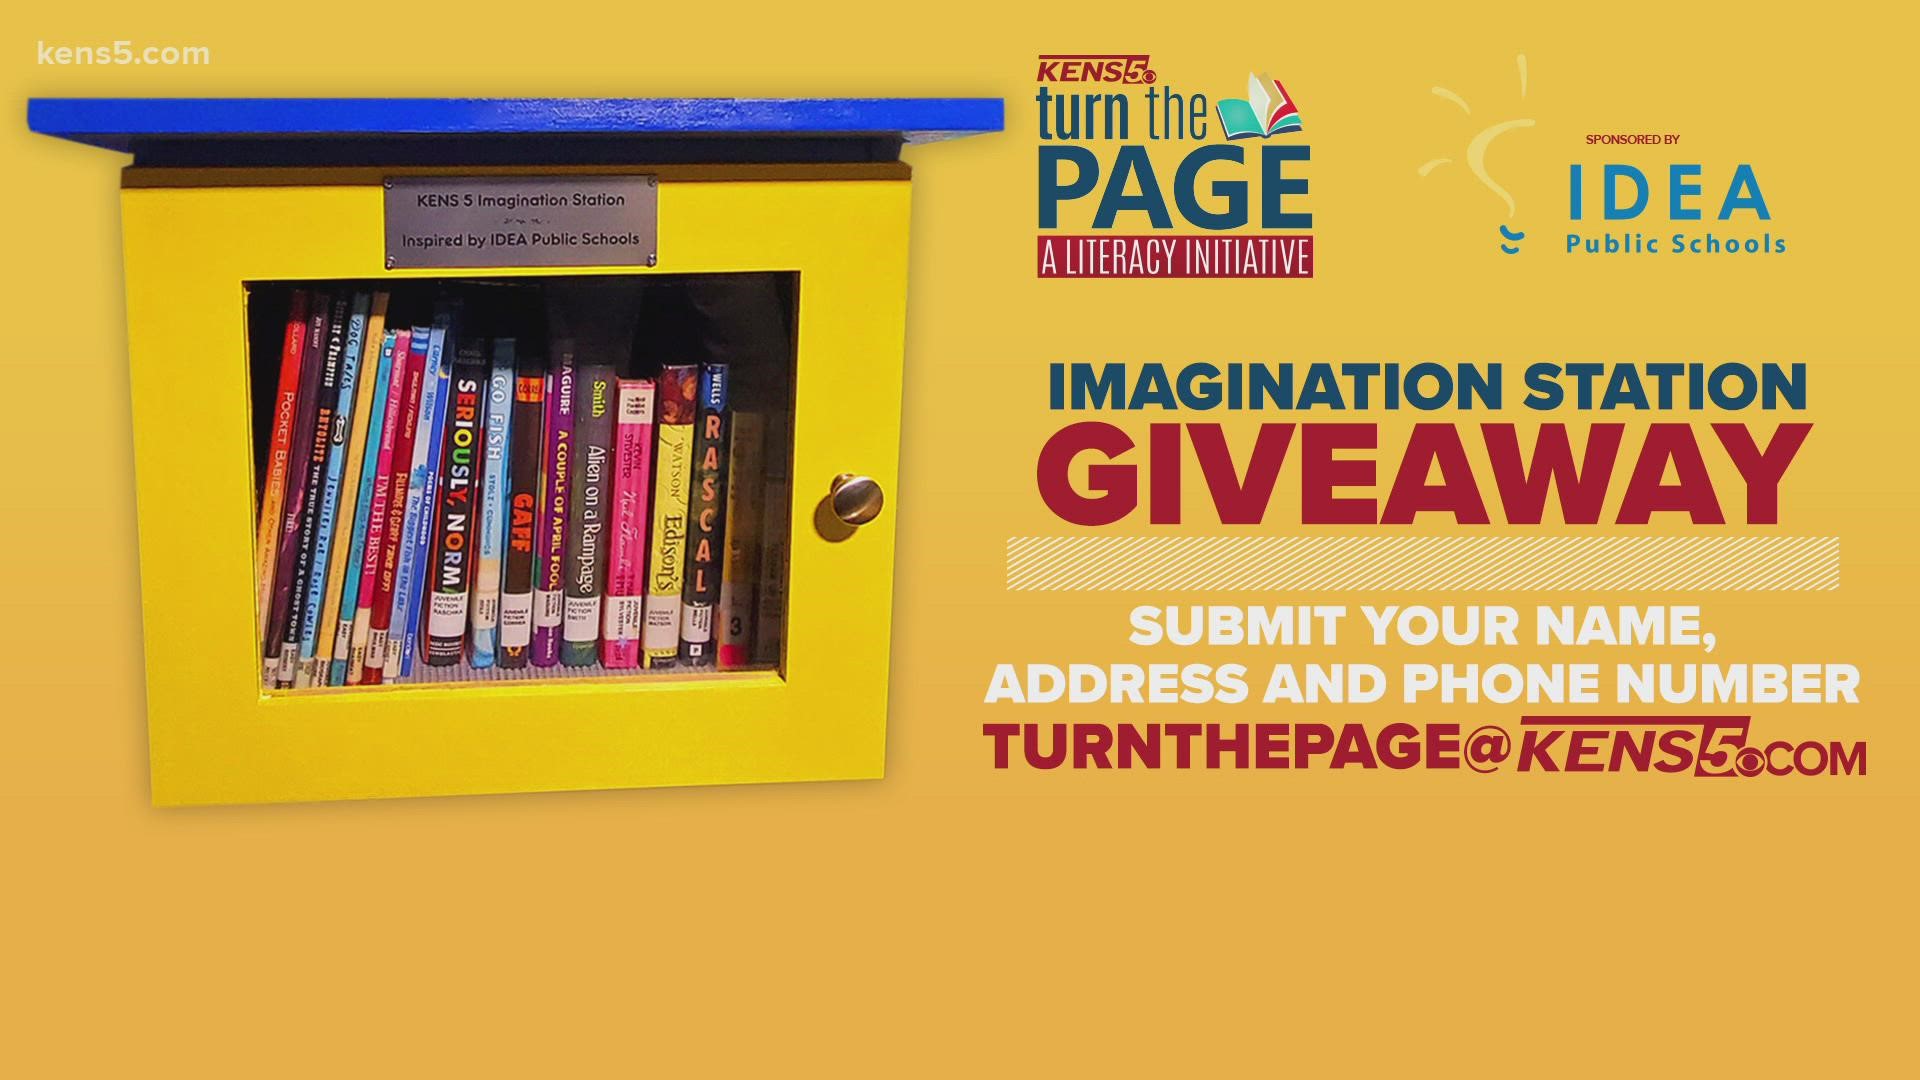 It's easy: Submit your name, address and phone number by sending an email to TurnThePage@kens5.com to be considered.